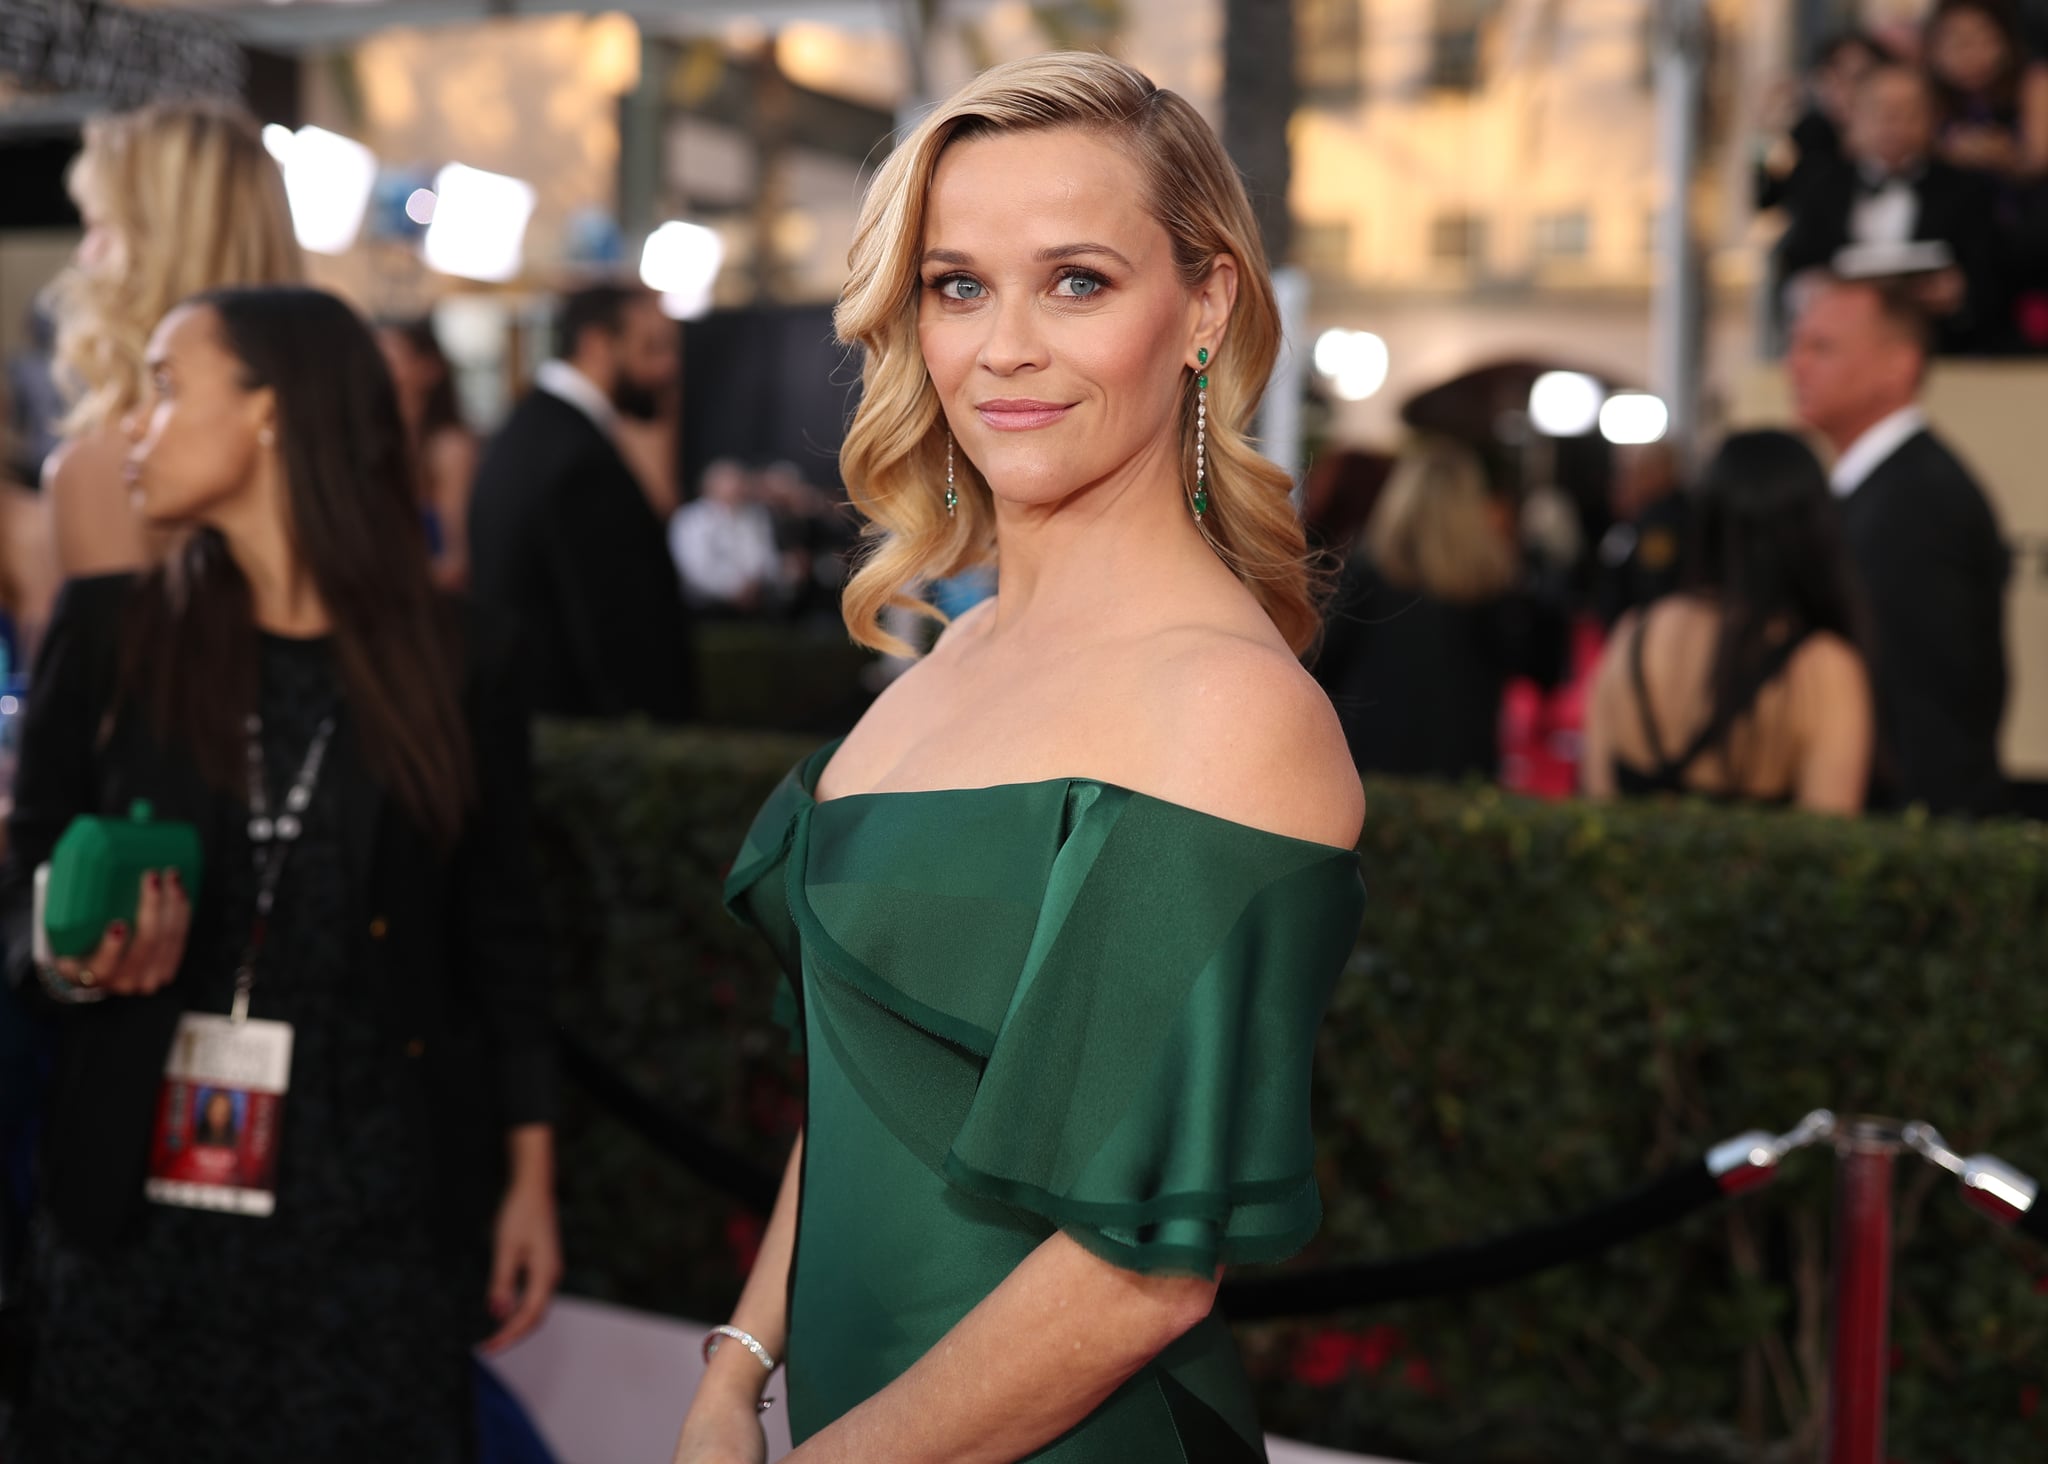 LOS ANGELES, CA - JANUARY 21:  Actor Reese Witherspoon attends the 24th Annual Screen Actors Guild Awards at The Shrine Auditorium on January 21, 2018 in Los Angeles, California. 27522_010  (Photo by Christopher Polk/Getty Images for Turner)